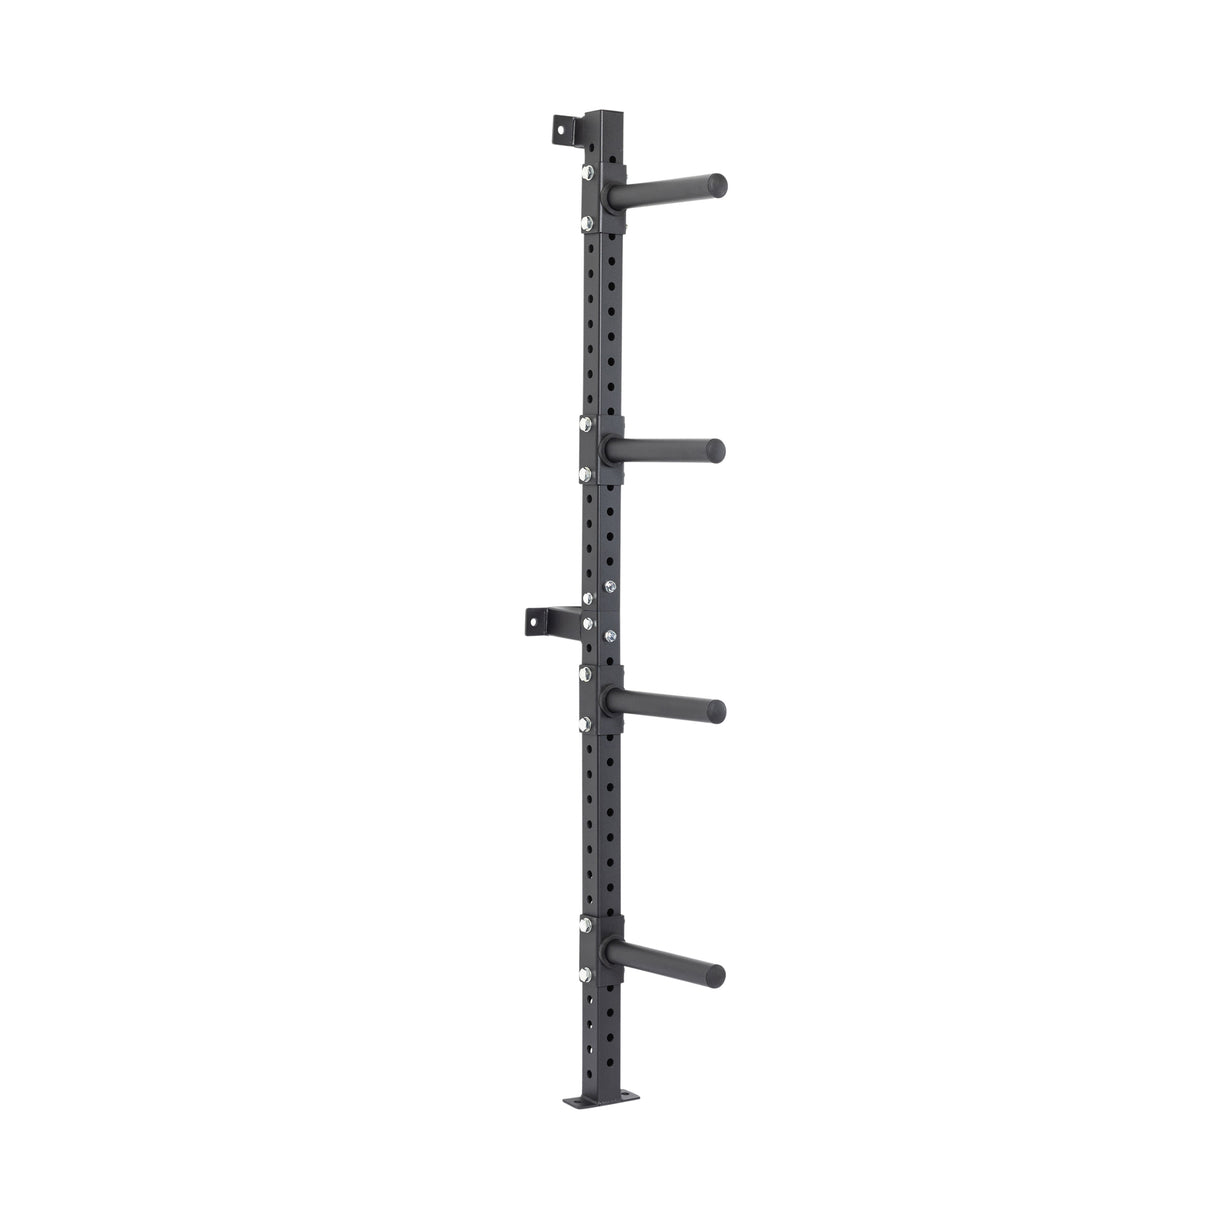 Wall-Mounted Plate Storage Rack (Ships by June 19)